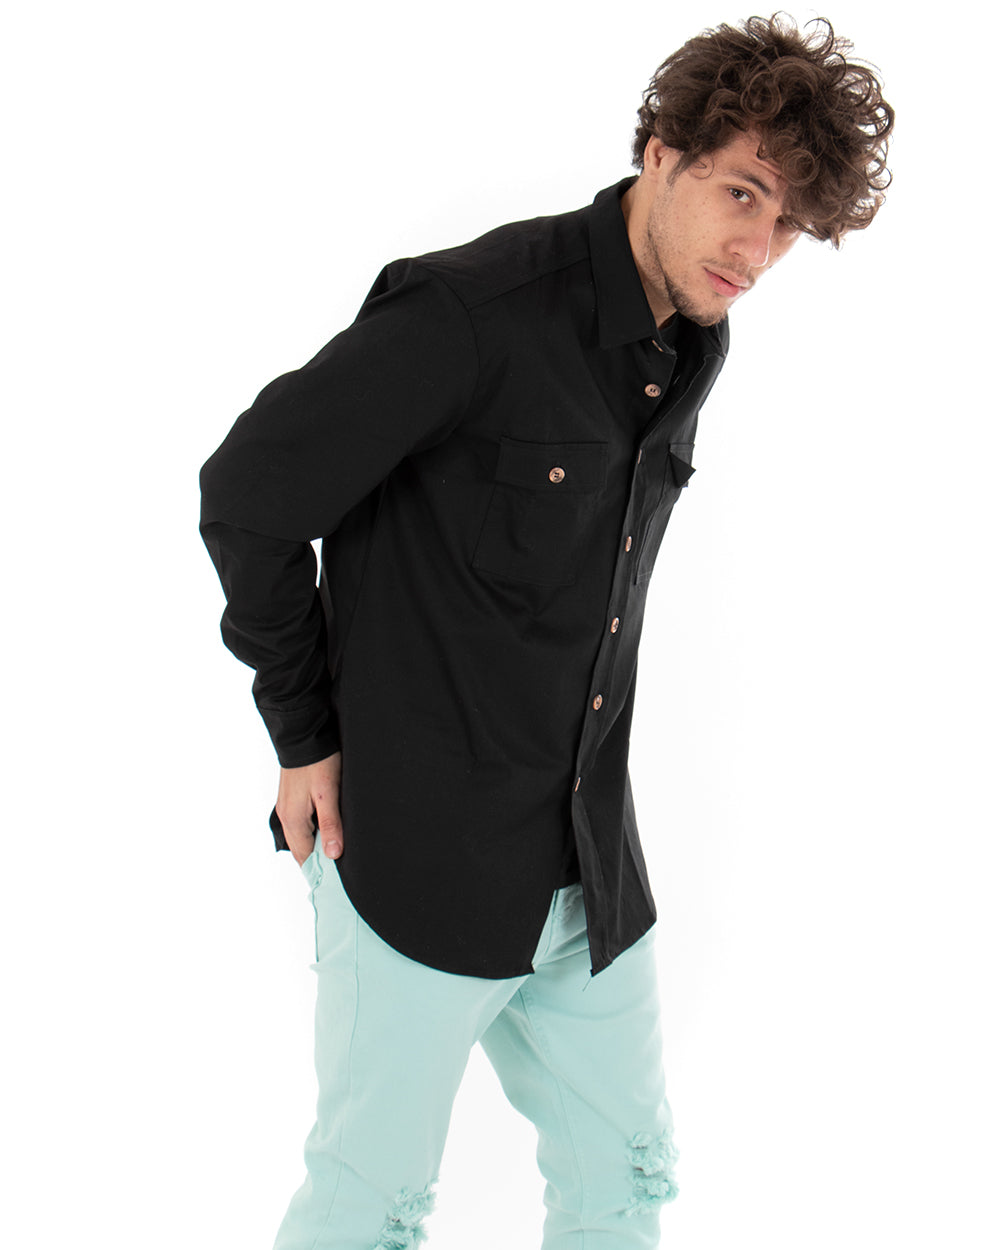 Men's Shirt With Collar Long Sleeve Casual Black Cotton GIOSAL-C1862A